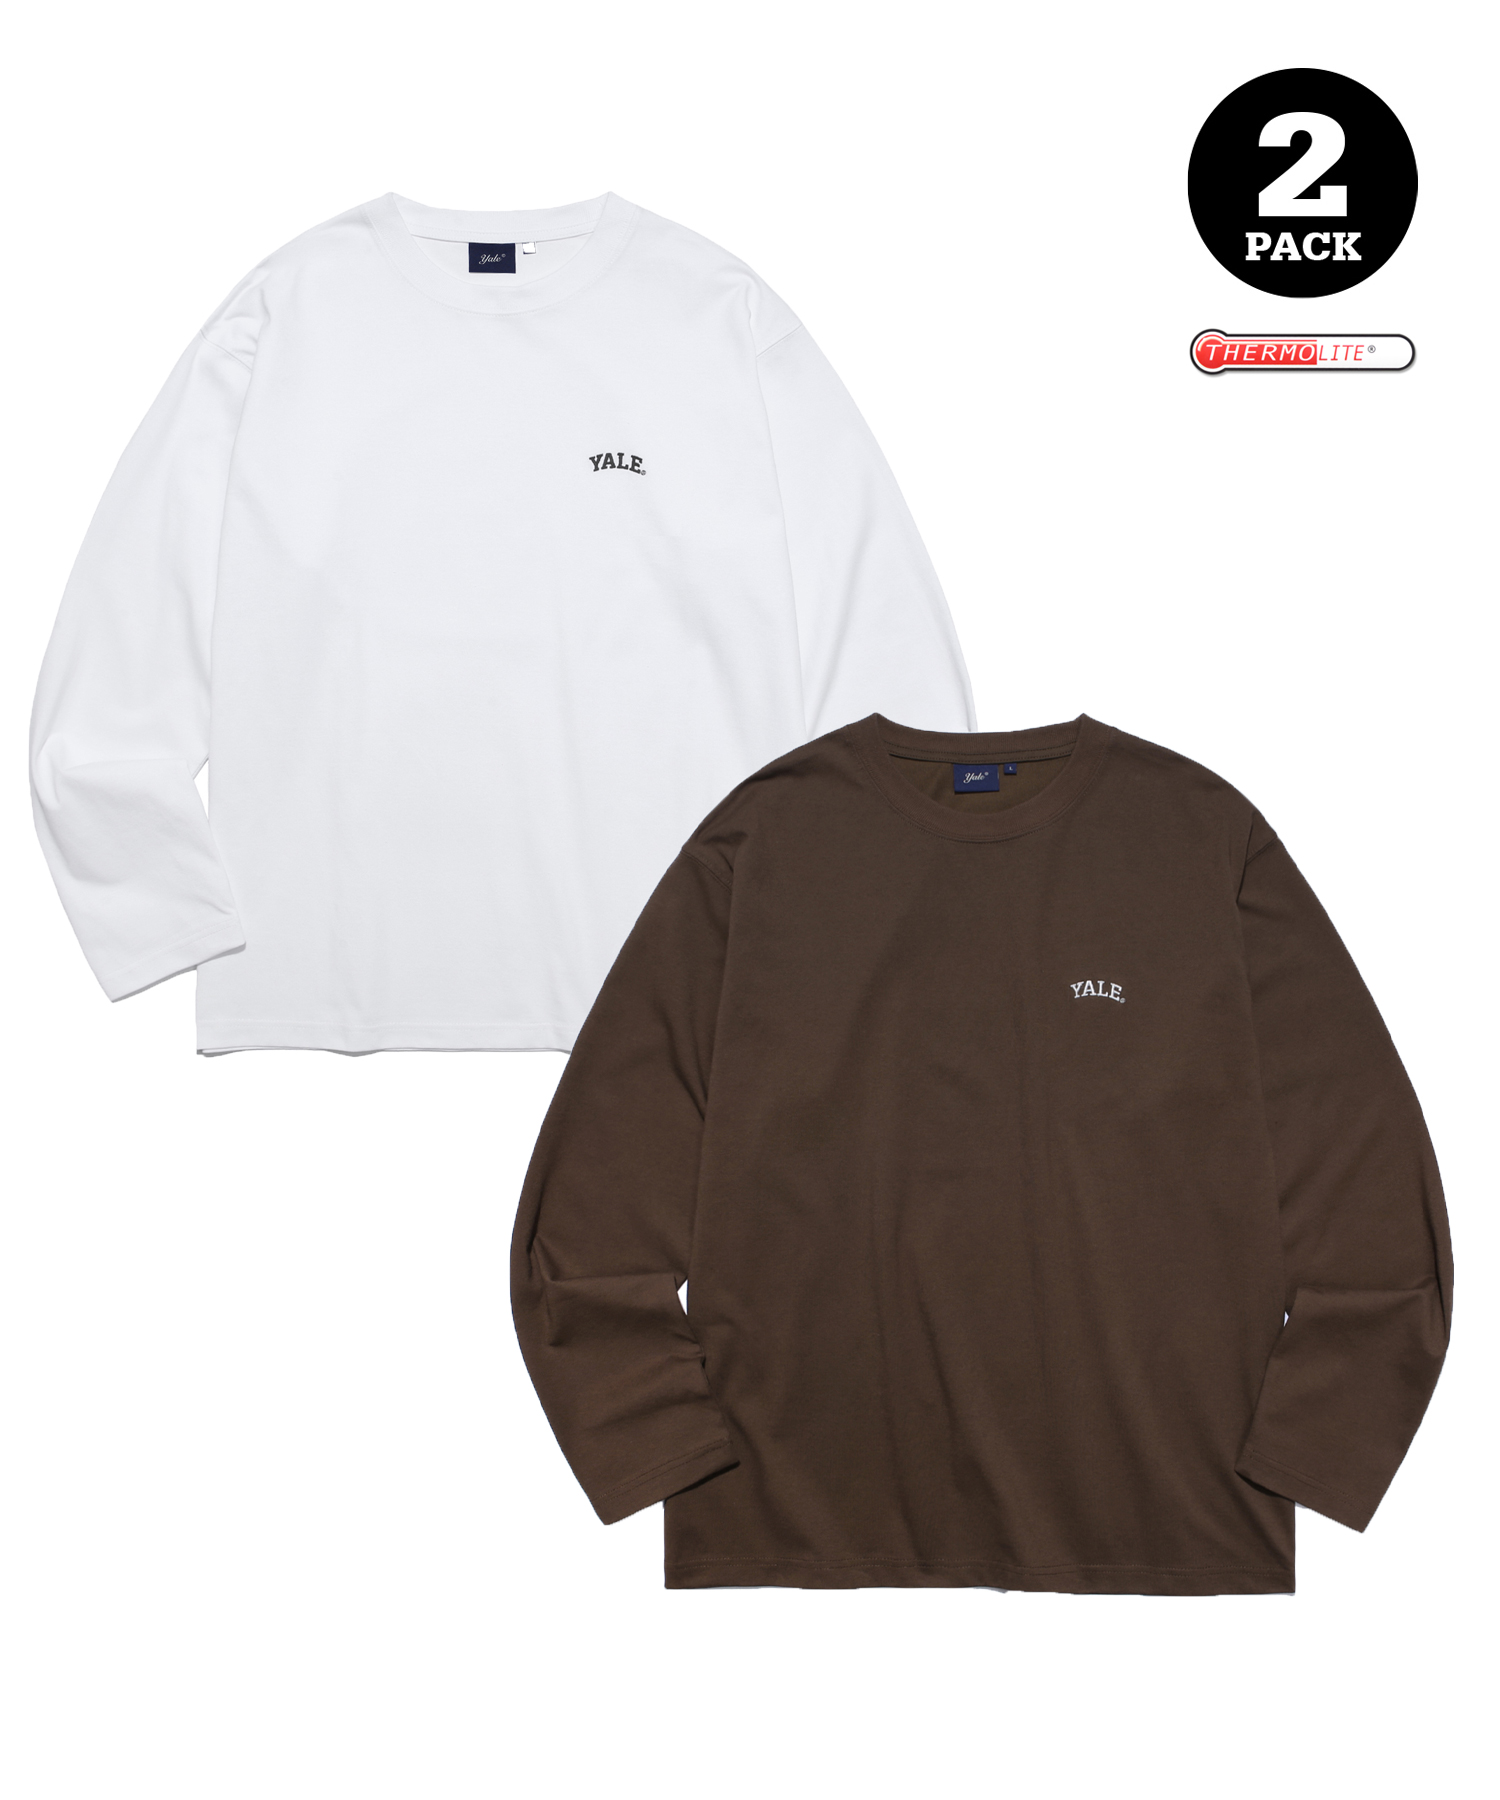 [ONEMILE WEAR] WARM UP 2PACK SMALL ARCH LS WHITE/BROWN